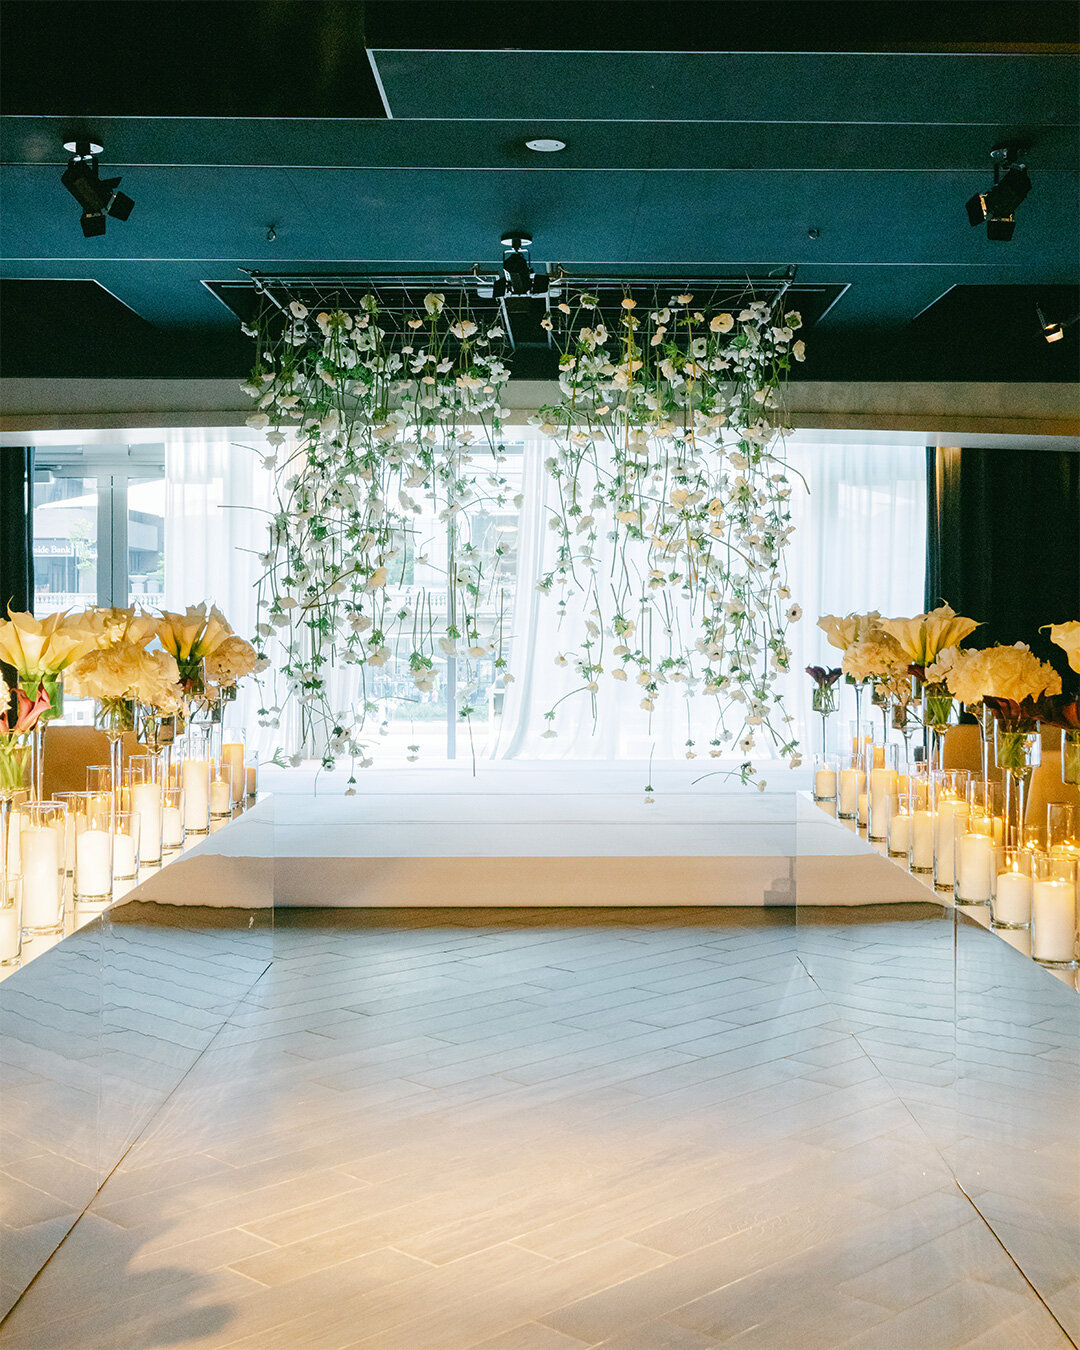 Suspended blooms surrounded Faran &amp; Garrett as they said their vows at the beautiful @rpmeventschicago 

Planning by @johnnametcalf @bigcitybride 
Beauty by @rarebirdbeauties 
Decor by @revel_decor 
Music by bkobeatmix 

#chicagoweddingphotograph